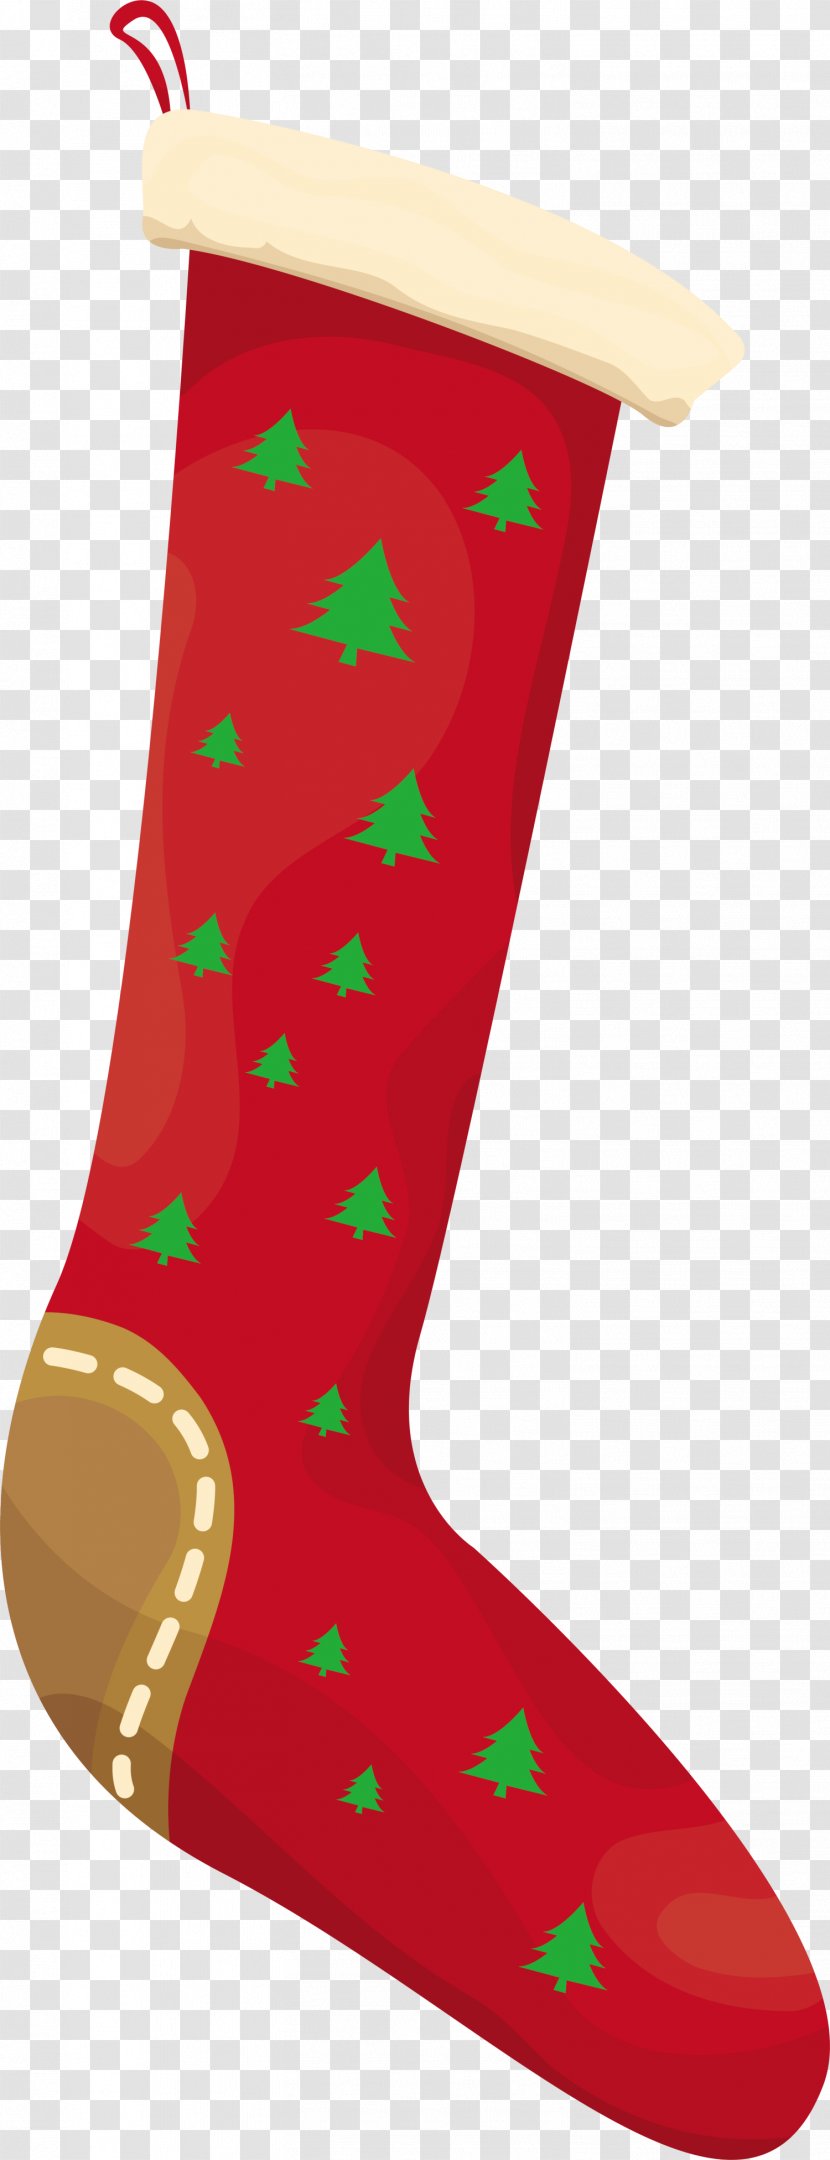 Christmas Stockings Red Tree - Stocking - Green Socks Transparent PNG